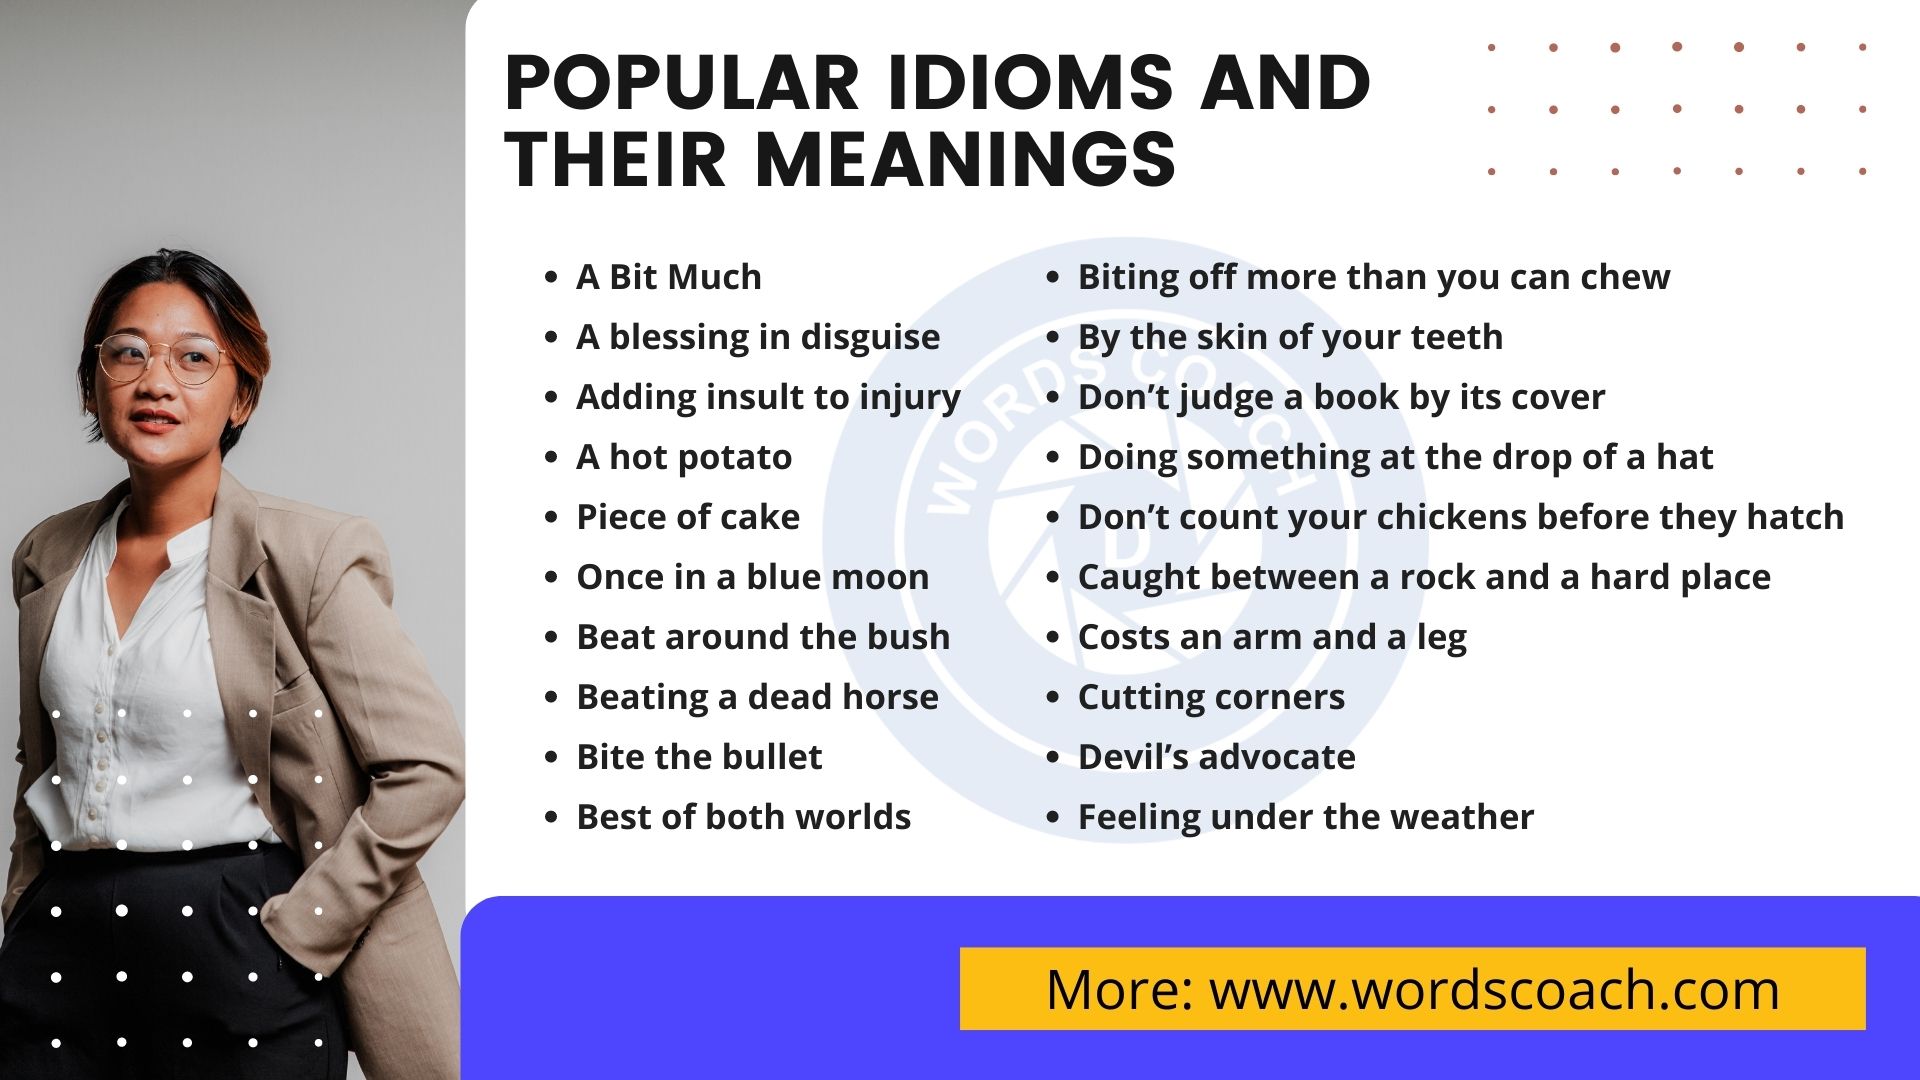 POPULAR IDIOMS AND THEIR MEANINGS - wordscoach.com